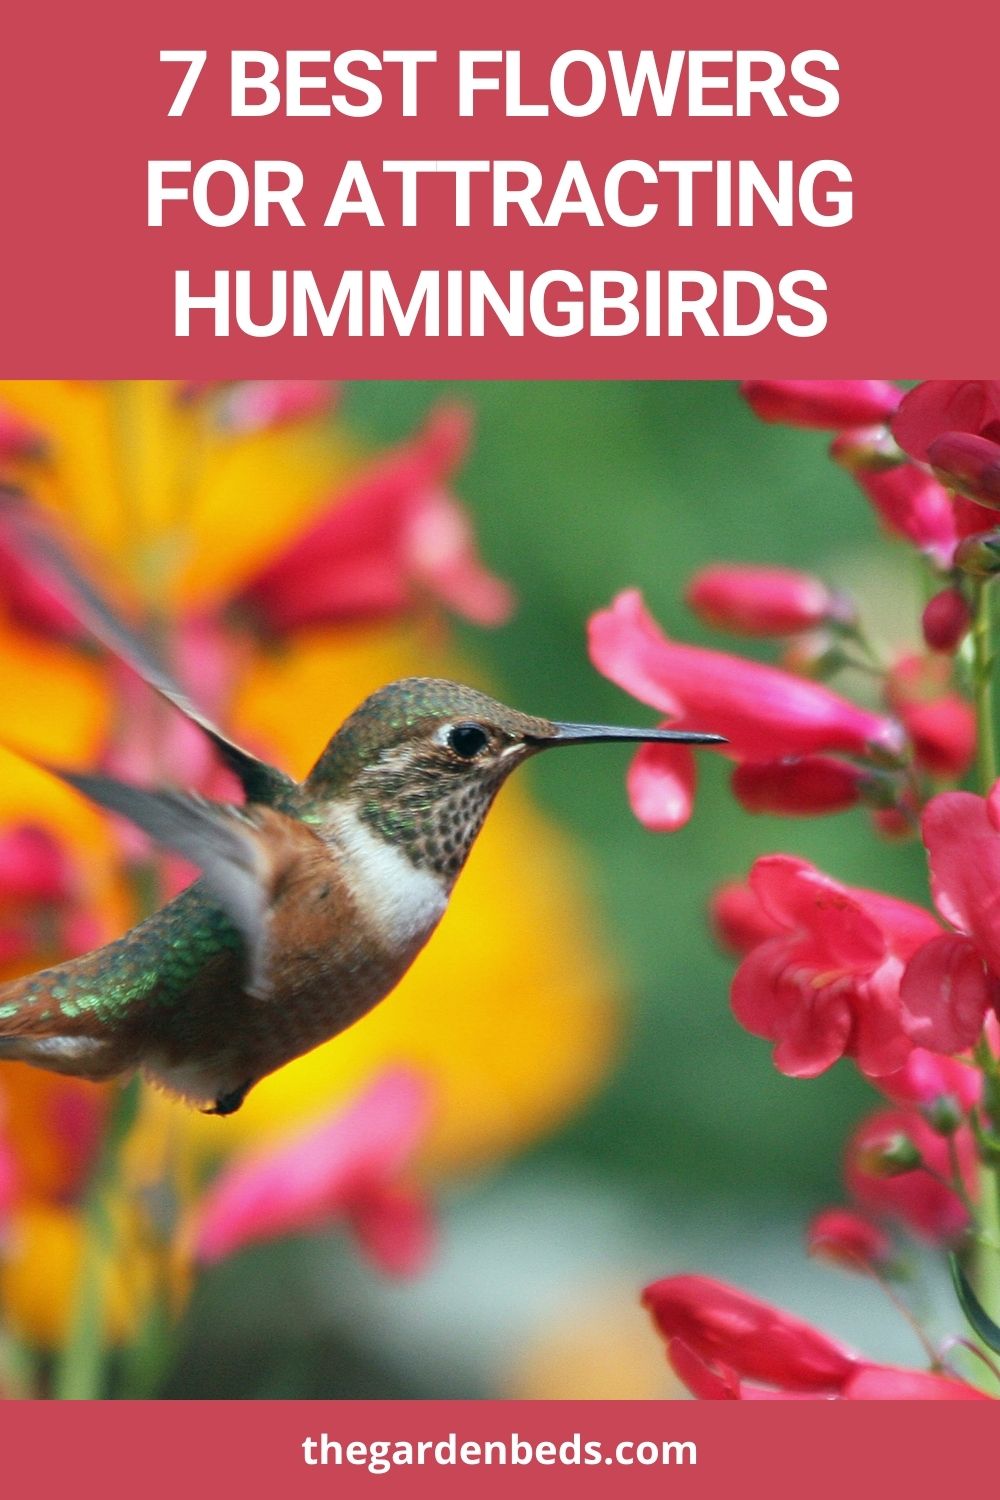 7 Best Flowers for Attracting Hummingbirds